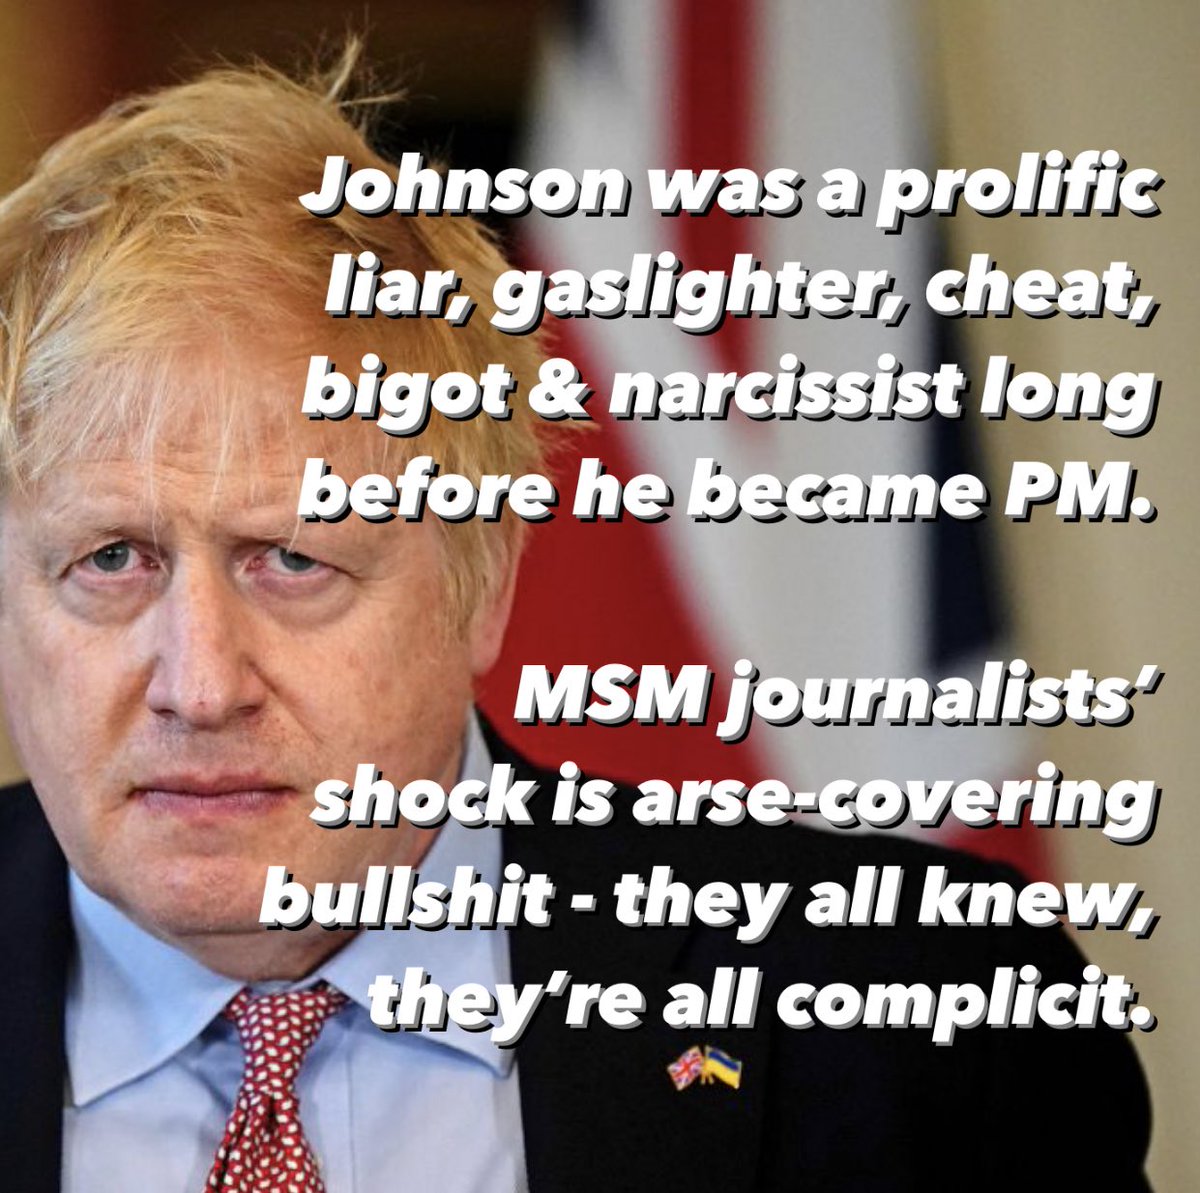 It would appear that the vast majority of U.K. mainstream journalists are incredibly poor judges of character & shockingly bad at their jobs - narcissist Johnson was a known, proven & prolific liar, gaslighter & dodgy-dealer long before he became PM. #CovidInquiry #ComplicitMedia